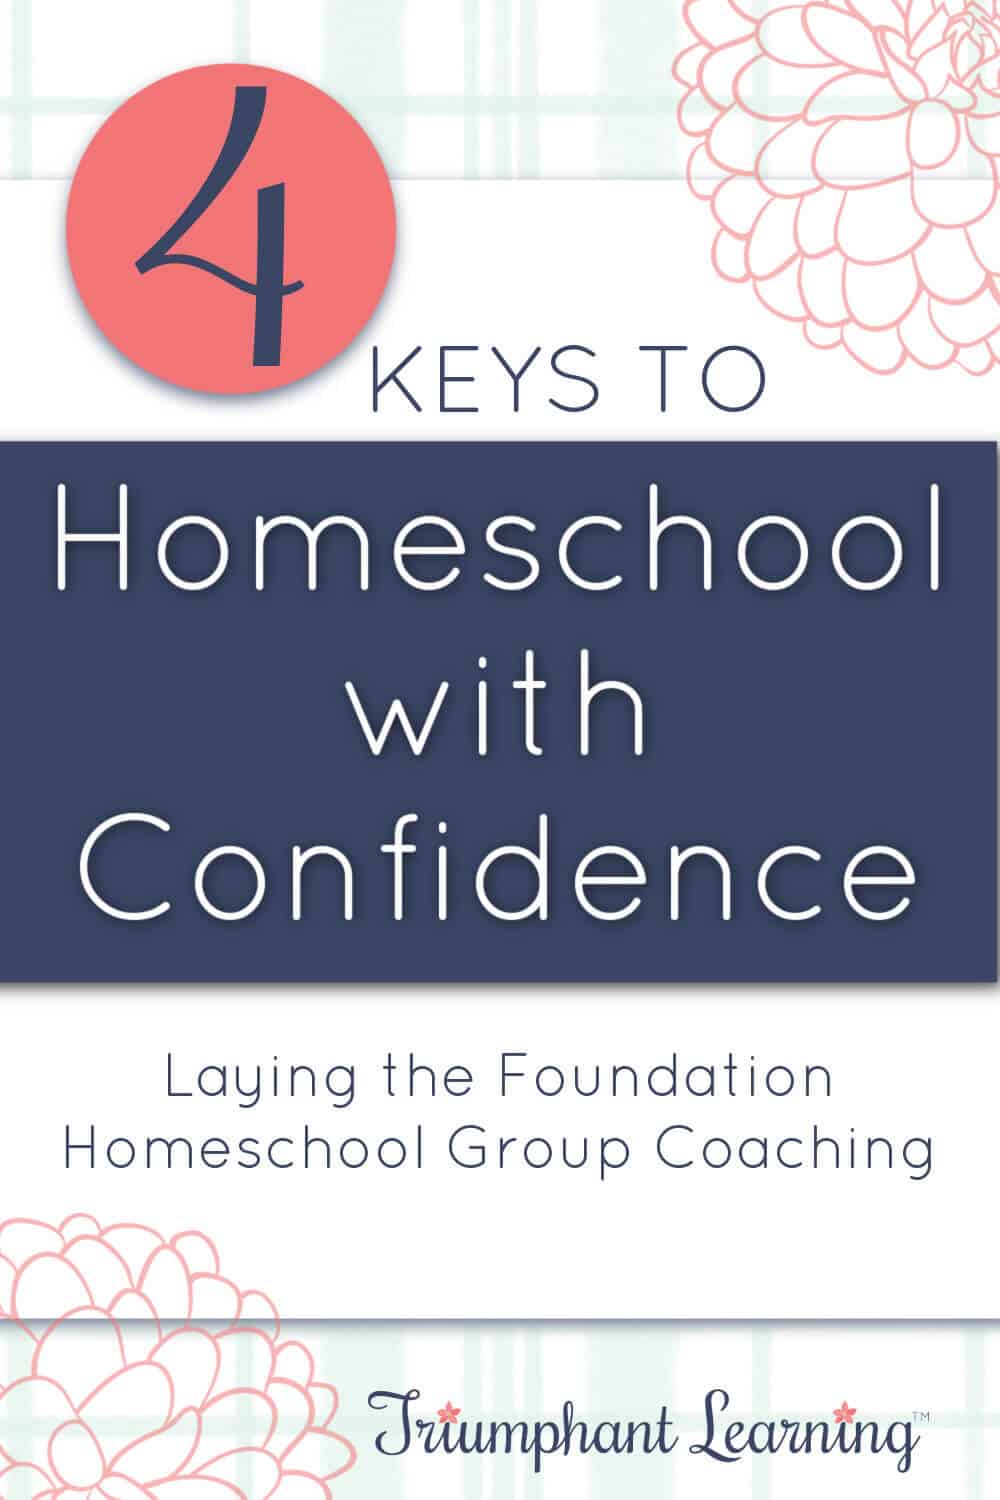 Learn about the four key principles every home educator should consider as you lay the foundation to homeschool with confidence. At the end of this homeschool group coaching program, you will know what to consider as you make decisions that are best for your children. via @TriLearning